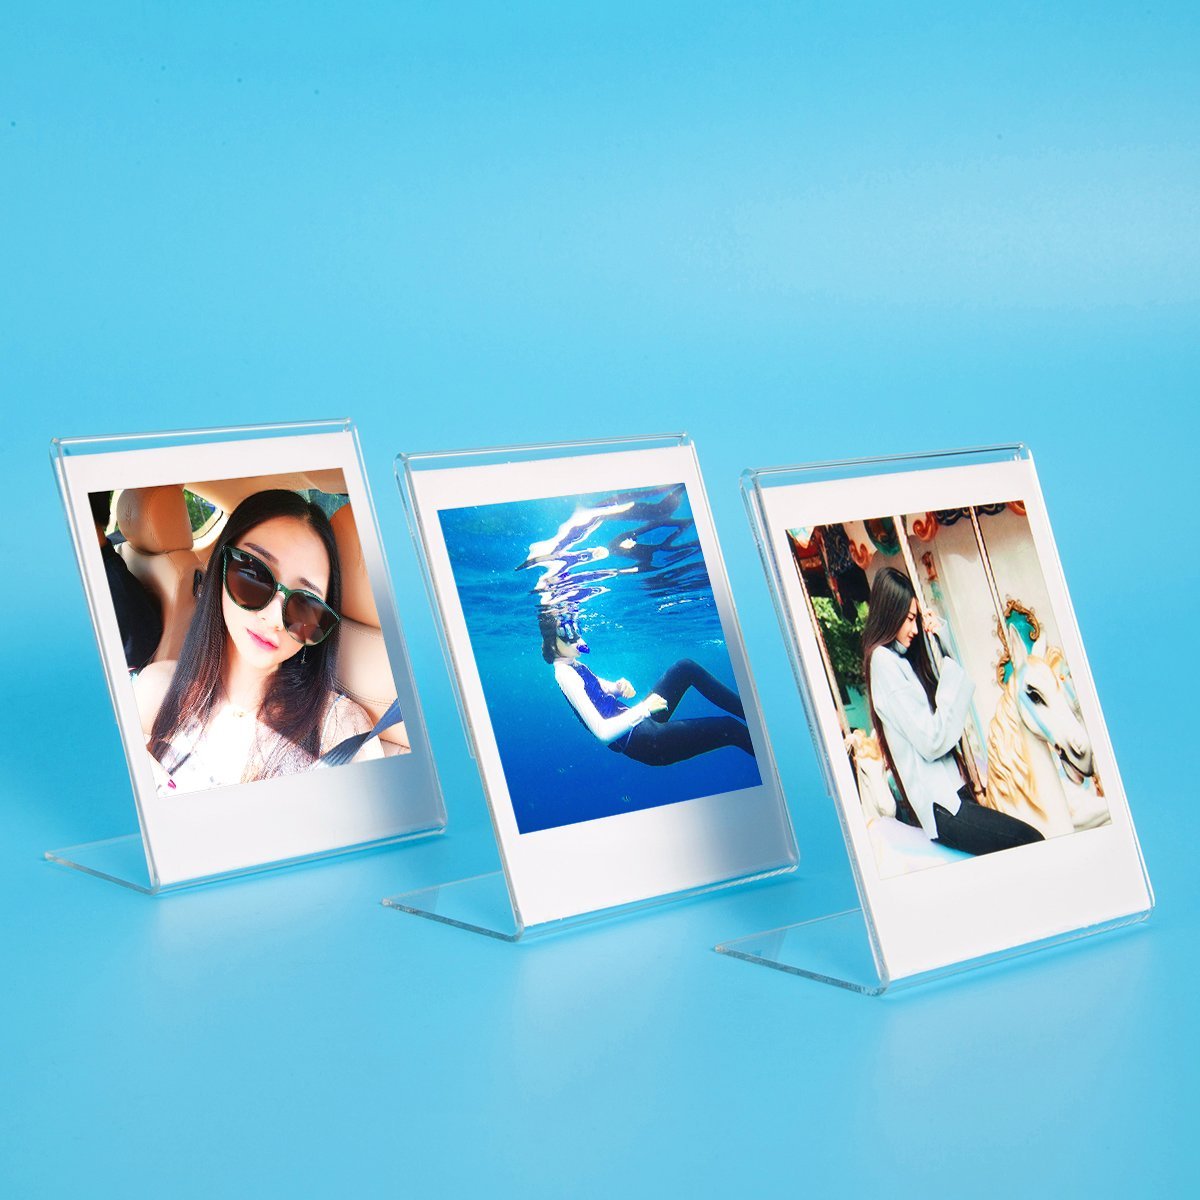 CAIUL L Model Clear Acrylic Photo Frame for Fujifilm Instax Square SQ10 Instant Film, 3pcs